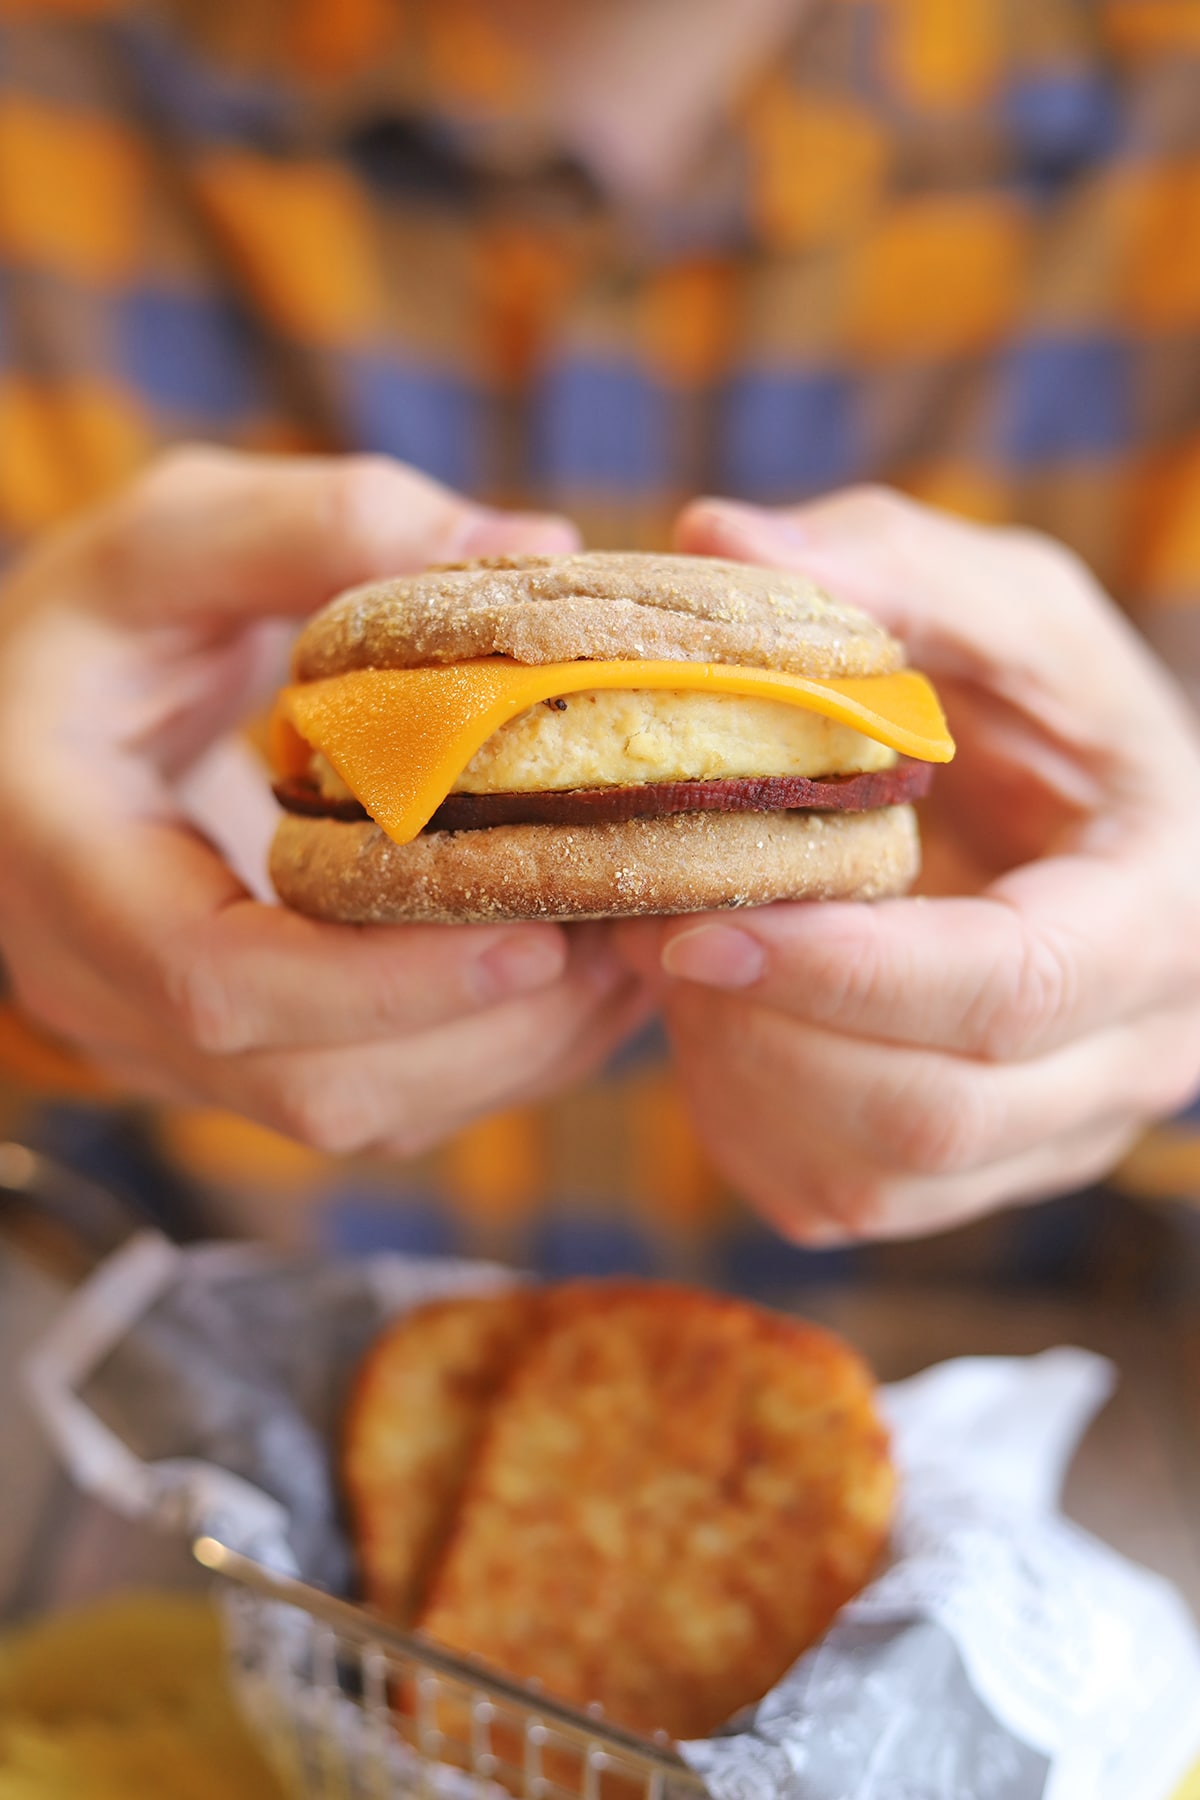 Hands holding English muffin breakfast sandwich by hashbrown patties.